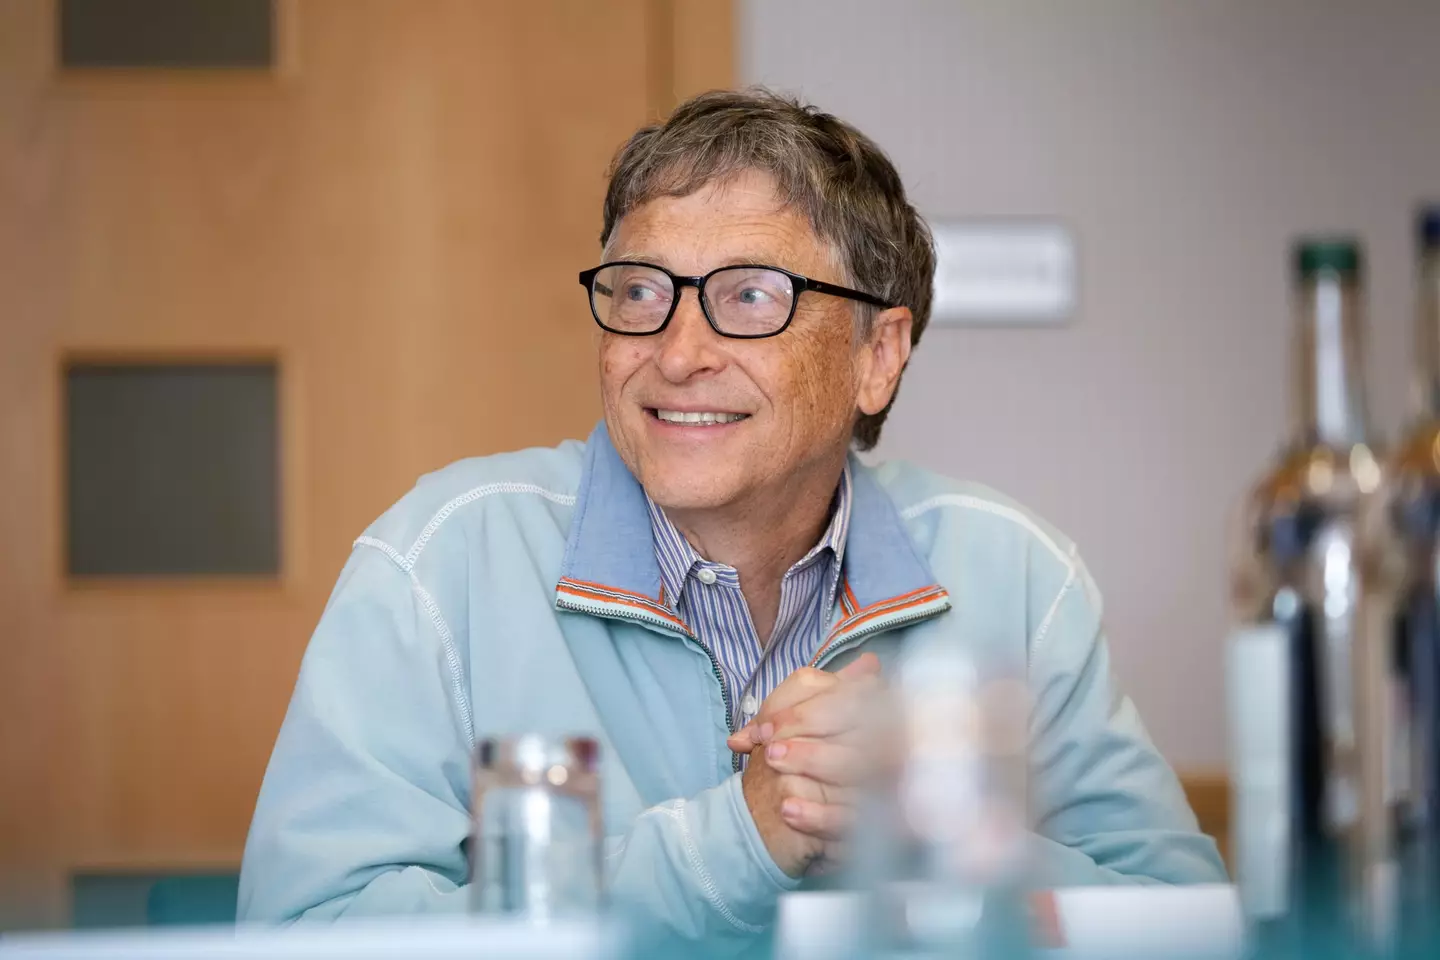 Bill Gates has denied ever visiting Jeffrey Epstein's island and said he regretted meeting him.